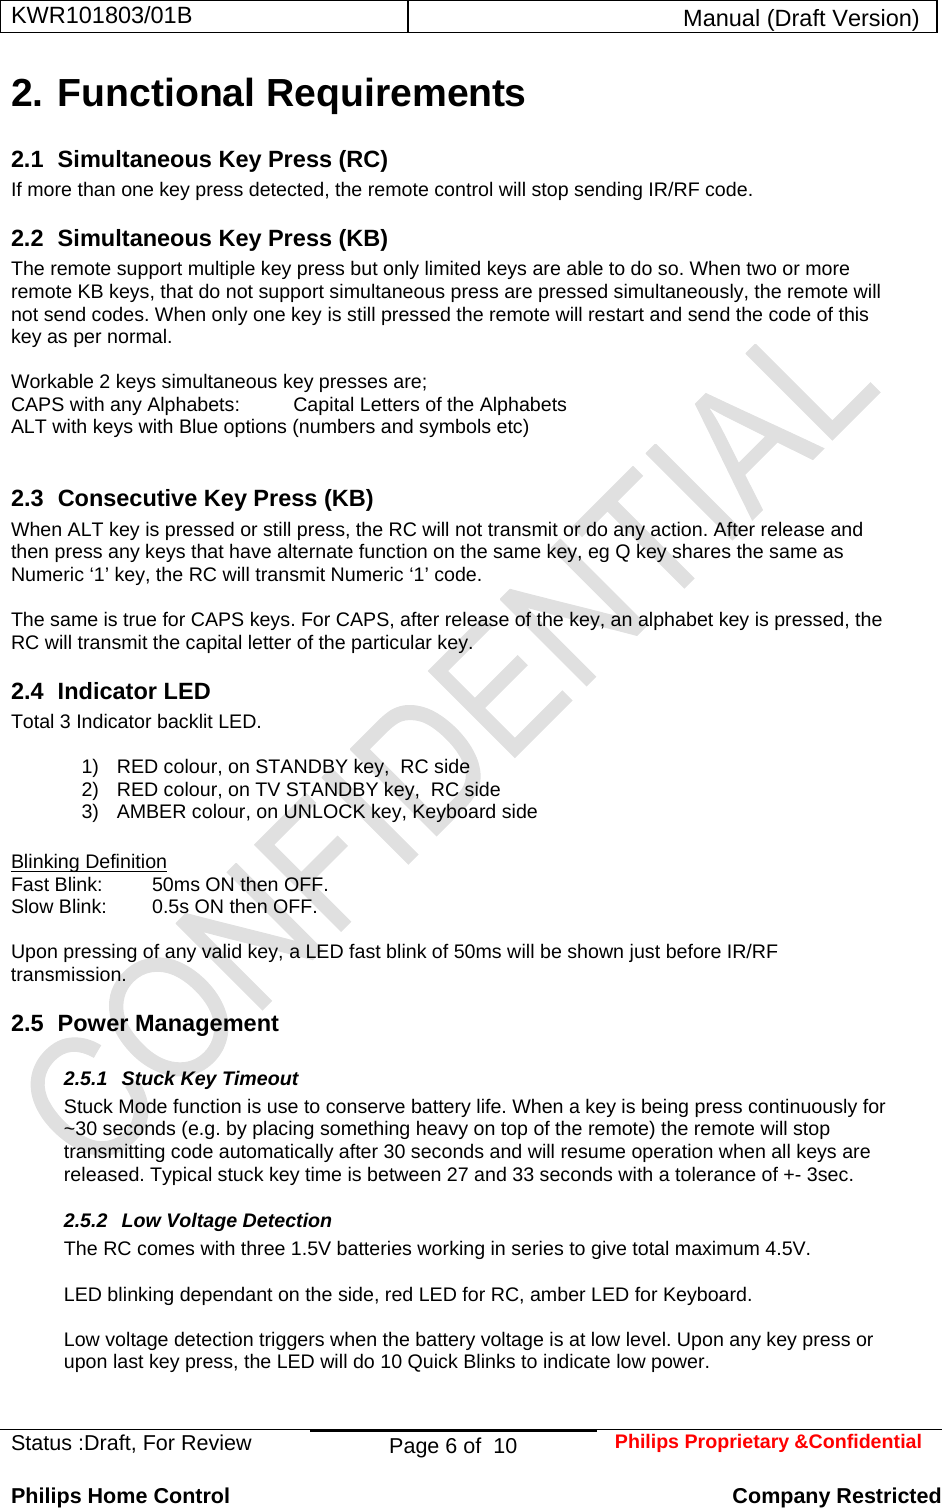 KWR101803/01B  Manual (Draft Version)  Status :Draft, For Review  Page 6 of  10  Philips Proprietary &amp;Confidential  Philips Home Control   Company Restricted 2. Functional Requirements 2.1  Simultaneous Key Press (RC) If more than one key press detected, the remote control will stop sending IR/RF code. 2.2  Simultaneous Key Press (KB) The remote support multiple key press but only limited keys are able to do so. When two or more remote KB keys, that do not support simultaneous press are pressed simultaneously, the remote will not send codes. When only one key is still pressed the remote will restart and send the code of this key as per normal.  Workable 2 keys simultaneous key presses are; CAPS with any Alphabets:  Capital Letters of the Alphabets ALT with keys with Blue options (numbers and symbols etc)  2.3  Consecutive Key Press (KB) When ALT key is pressed or still press, the RC will not transmit or do any action. After release and then press any keys that have alternate function on the same key, eg Q key shares the same as Numeric ‘1’ key, the RC will transmit Numeric ‘1’ code.   The same is true for CAPS keys. For CAPS, after release of the key, an alphabet key is pressed, the RC will transmit the capital letter of the particular key.  2.4 Indicator LED Total 3 Indicator backlit LED.  1)  RED colour, on STANDBY key,  RC side 2)  RED colour, on TV STANDBY key,  RC side 3)  AMBER colour, on UNLOCK key, Keyboard side  Blinking Definition Fast Blink:  50ms ON then OFF. Slow Blink:  0.5s ON then OFF.  Upon pressing of any valid key, a LED fast blink of 50ms will be shown just before IR/RF transmission. 2.5 Power Management 2.5.1 Stuck Key Timeout Stuck Mode function is use to conserve battery life. When a key is being press continuously for ~30 seconds (e.g. by placing something heavy on top of the remote) the remote will stop transmitting code automatically after 30 seconds and will resume operation when all keys are released. Typical stuck key time is between 27 and 33 seconds with a tolerance of +- 3sec. 2.5.2  Low Voltage Detection The RC comes with three 1.5V batteries working in series to give total maximum 4.5V.   LED blinking dependant on the side, red LED for RC, amber LED for Keyboard.  Low voltage detection triggers when the battery voltage is at low level. Upon any key press or upon last key press, the LED will do 10 Quick Blinks to indicate low power.   